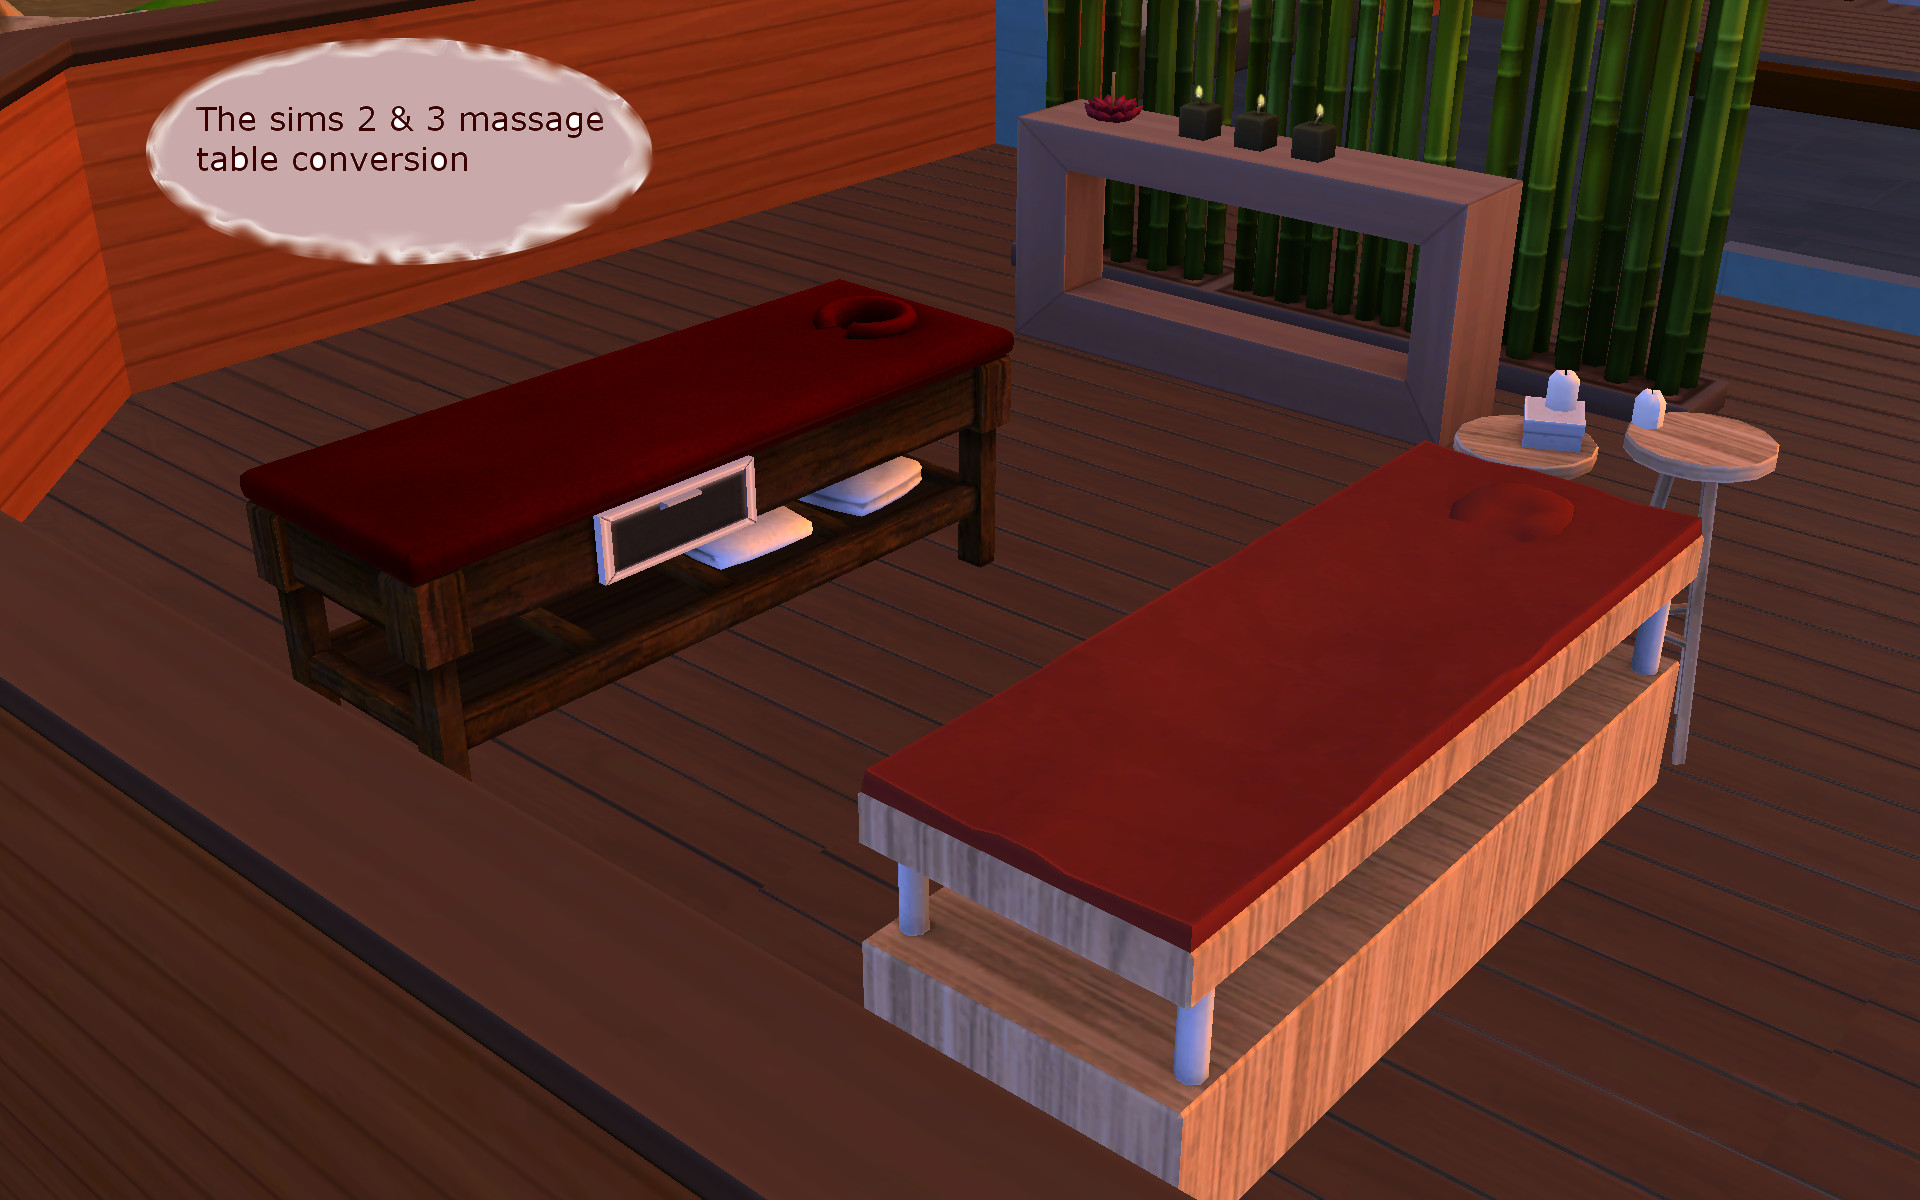 cam weber recommends Sims 3 Massage Table